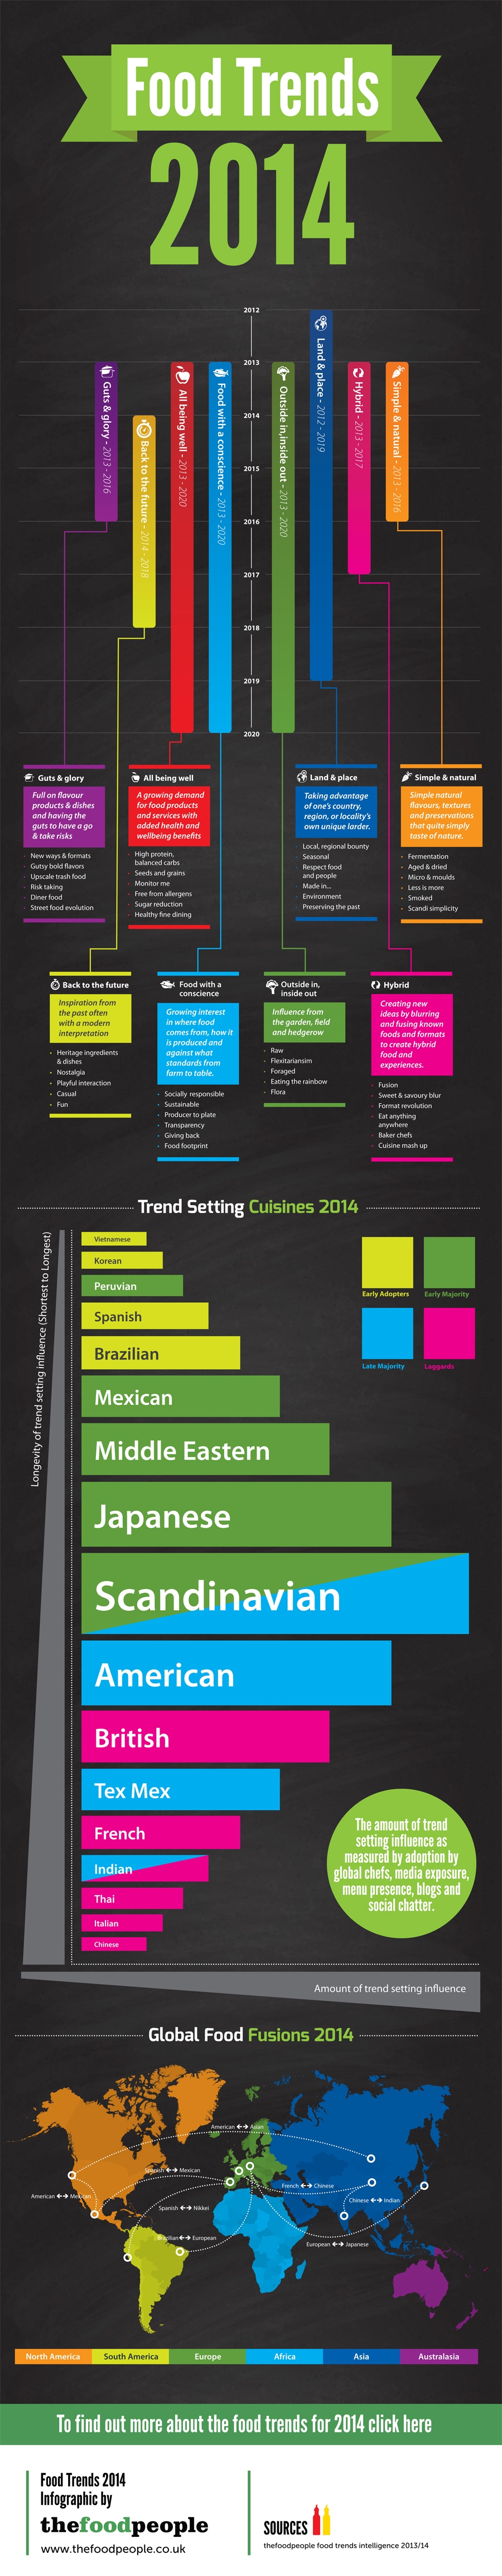 Infographic of Food Trends in 2014